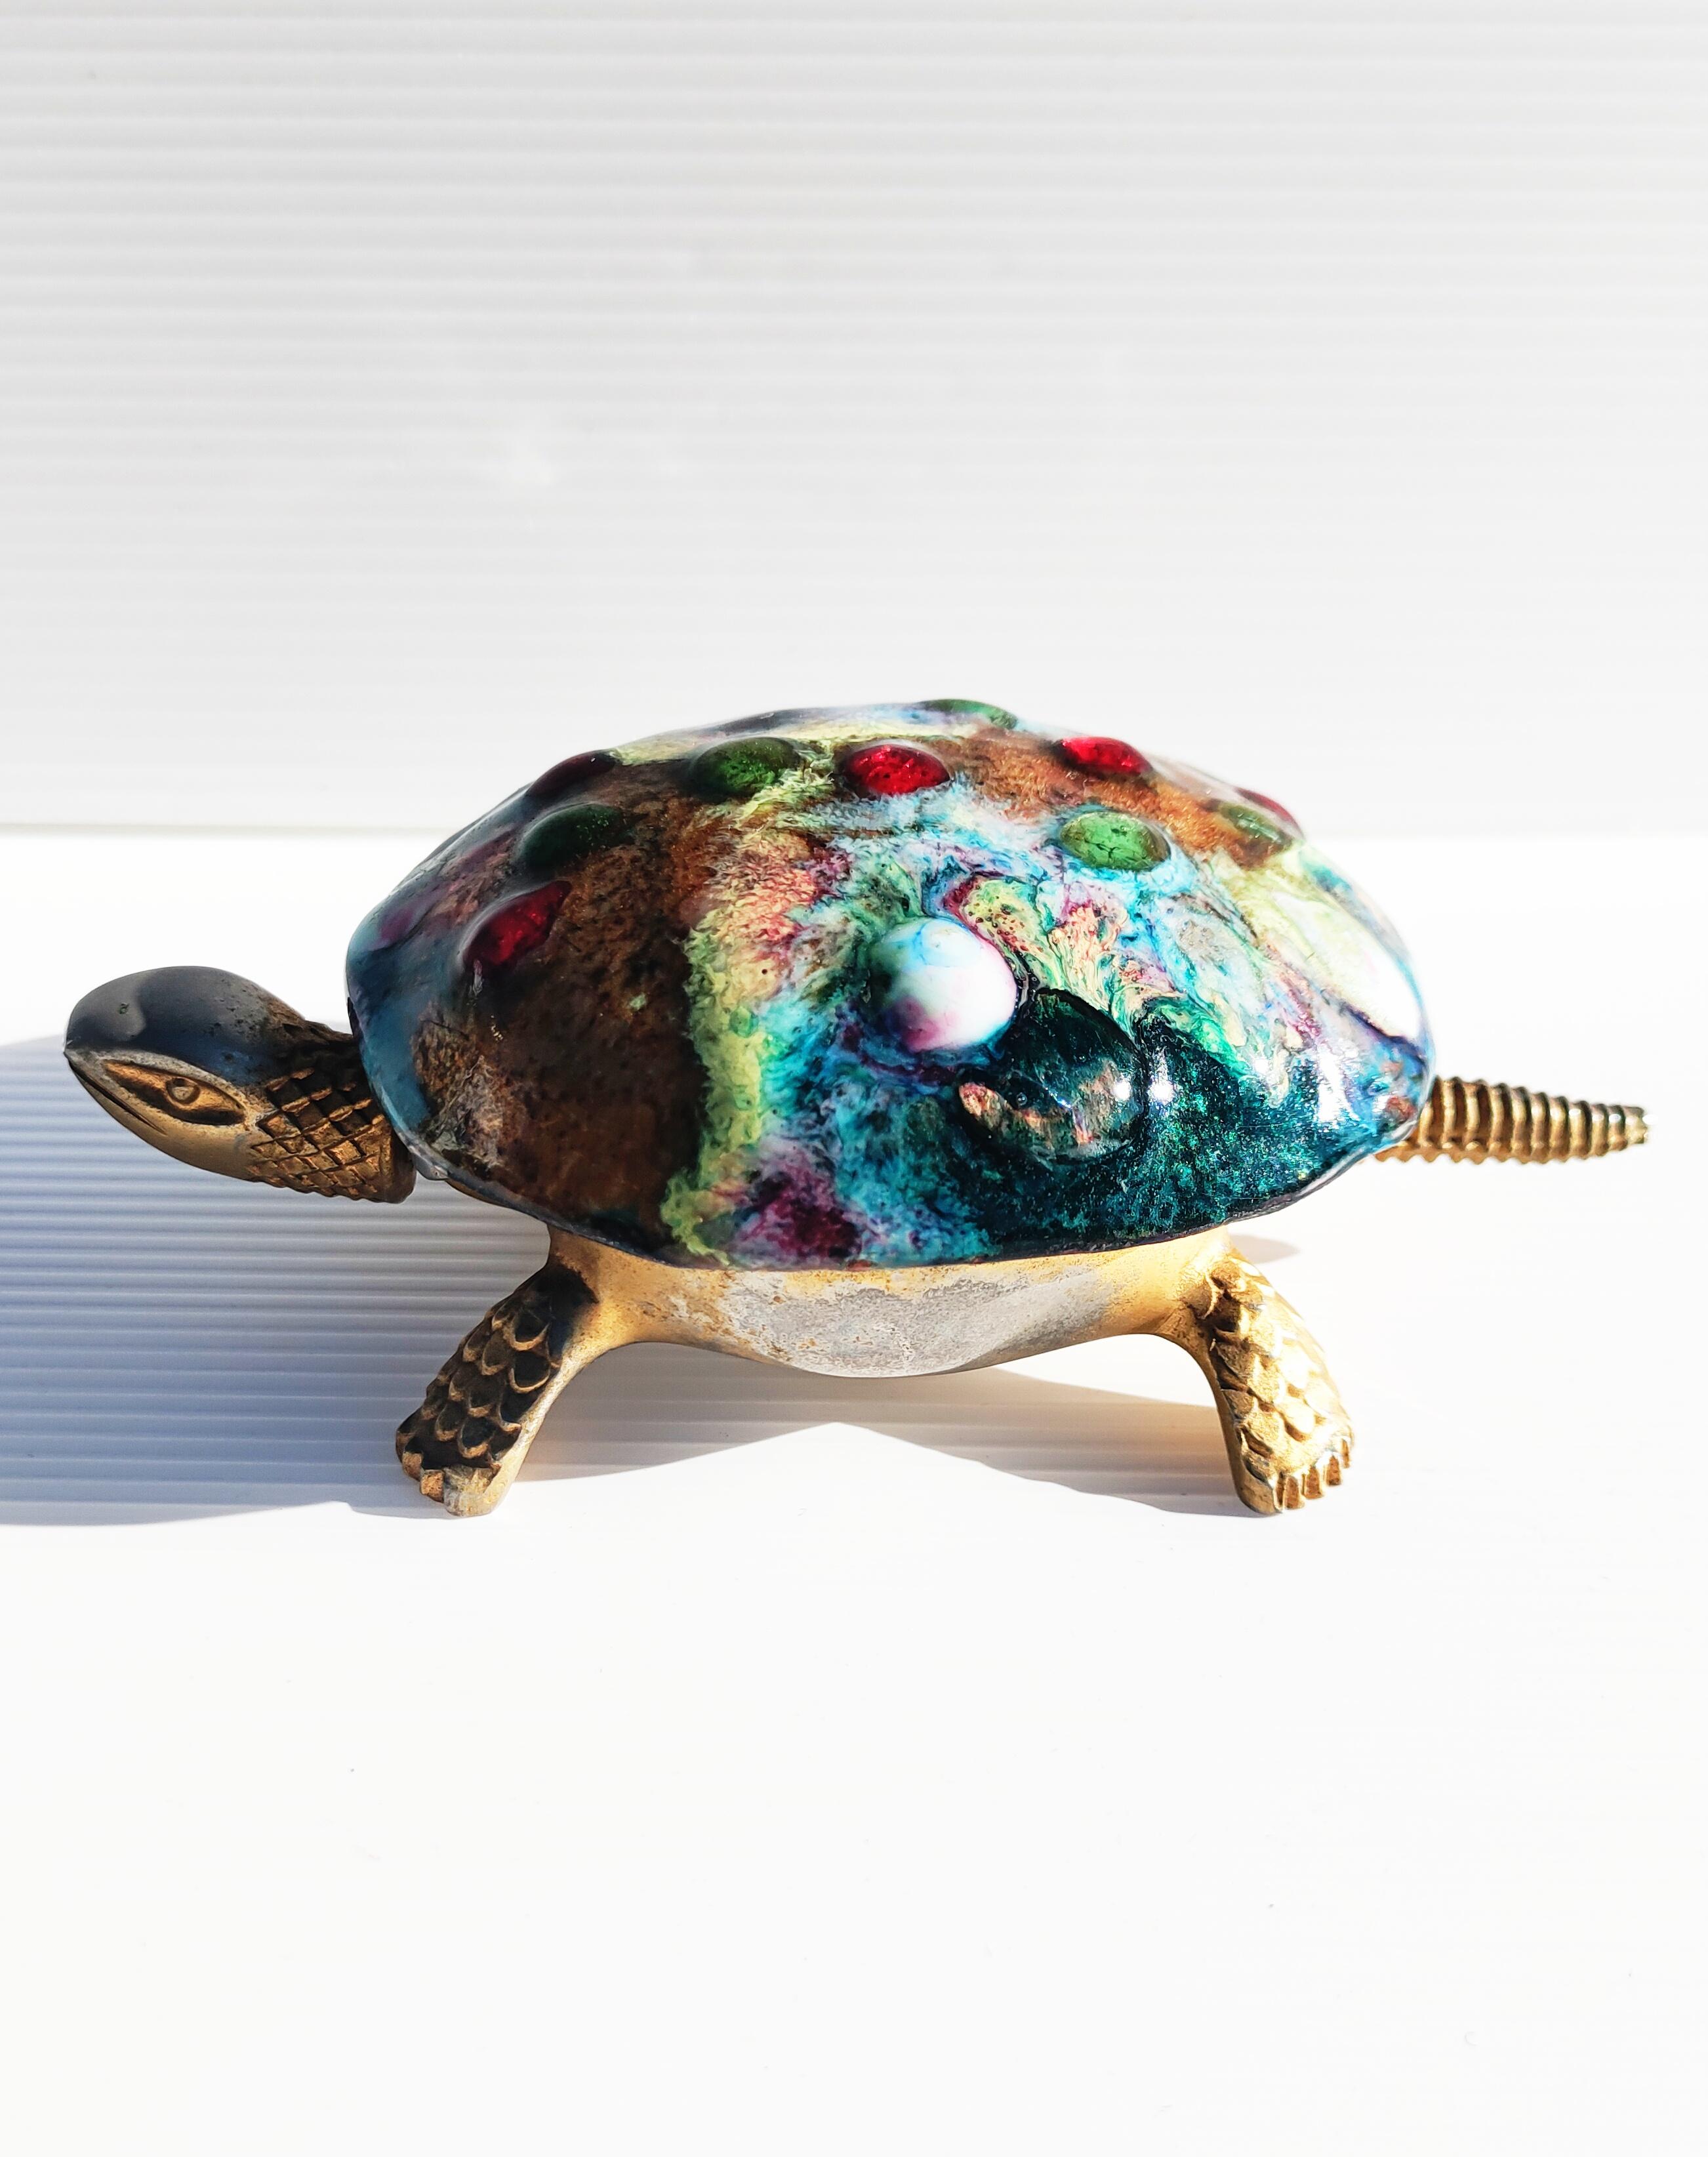 Rare Boj Brass Turtle Hotel Call Bell by Eibar, Spain, 1960s For Sale 2